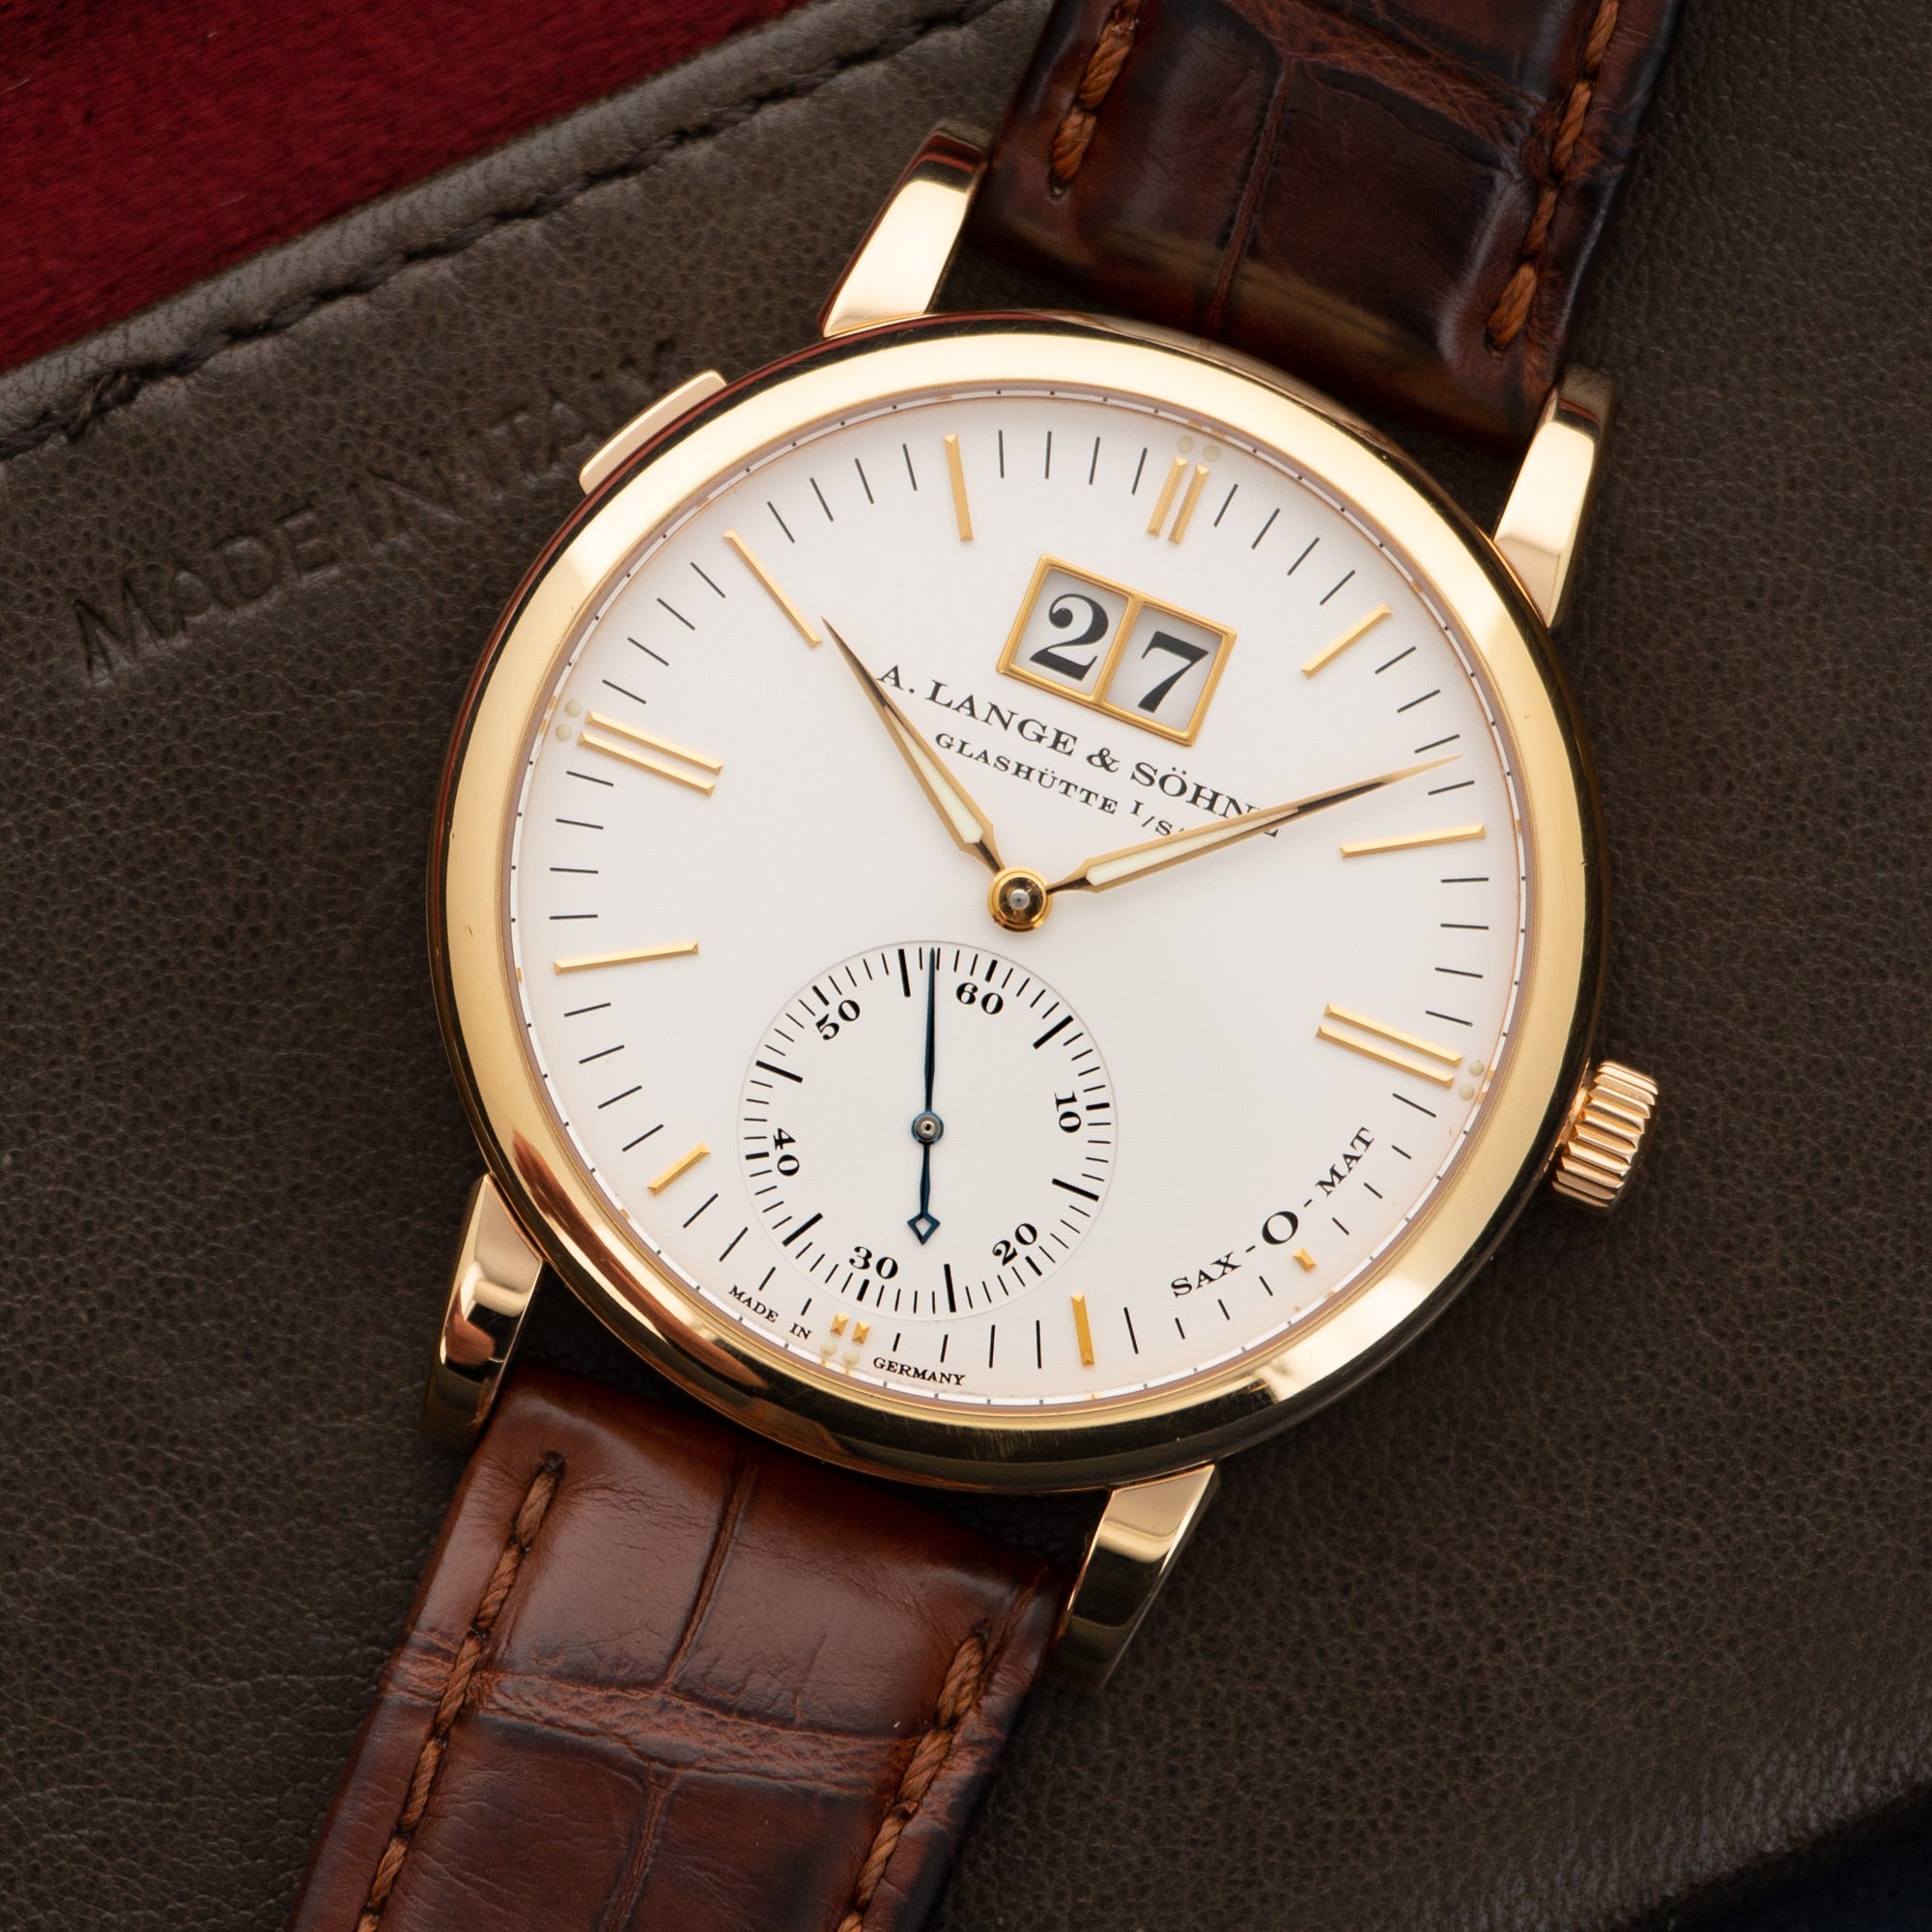 A. Lange & Sohne - A. Lange & Sohne Rose Gold Saxonia Automatic Watch Ref. 315.032 - The Keystone Watches